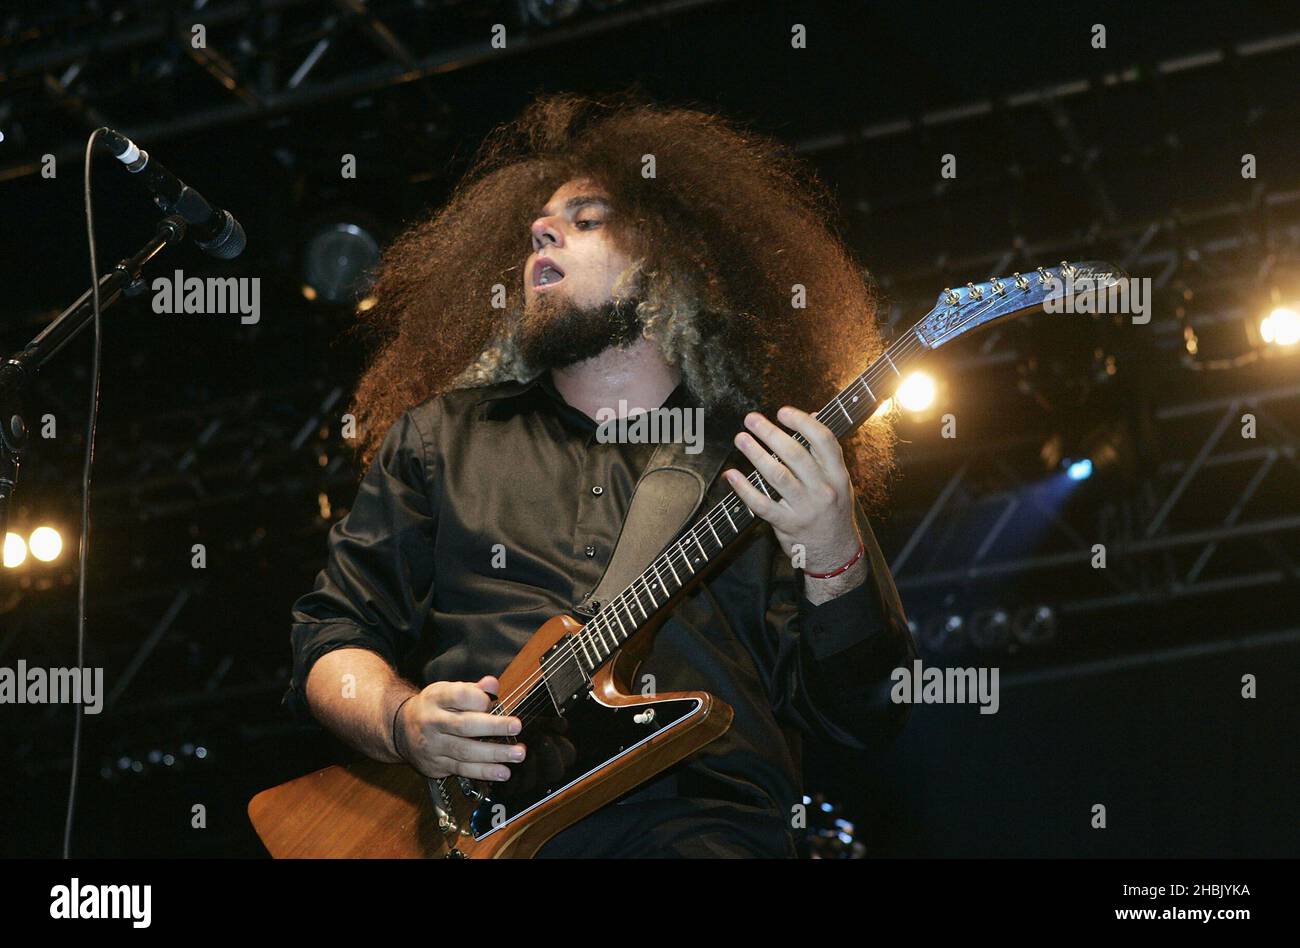 Coheed and Cambria perform at the Reading Festival, in Reading on 26 August, 2006. Entertainment. Stock Photo